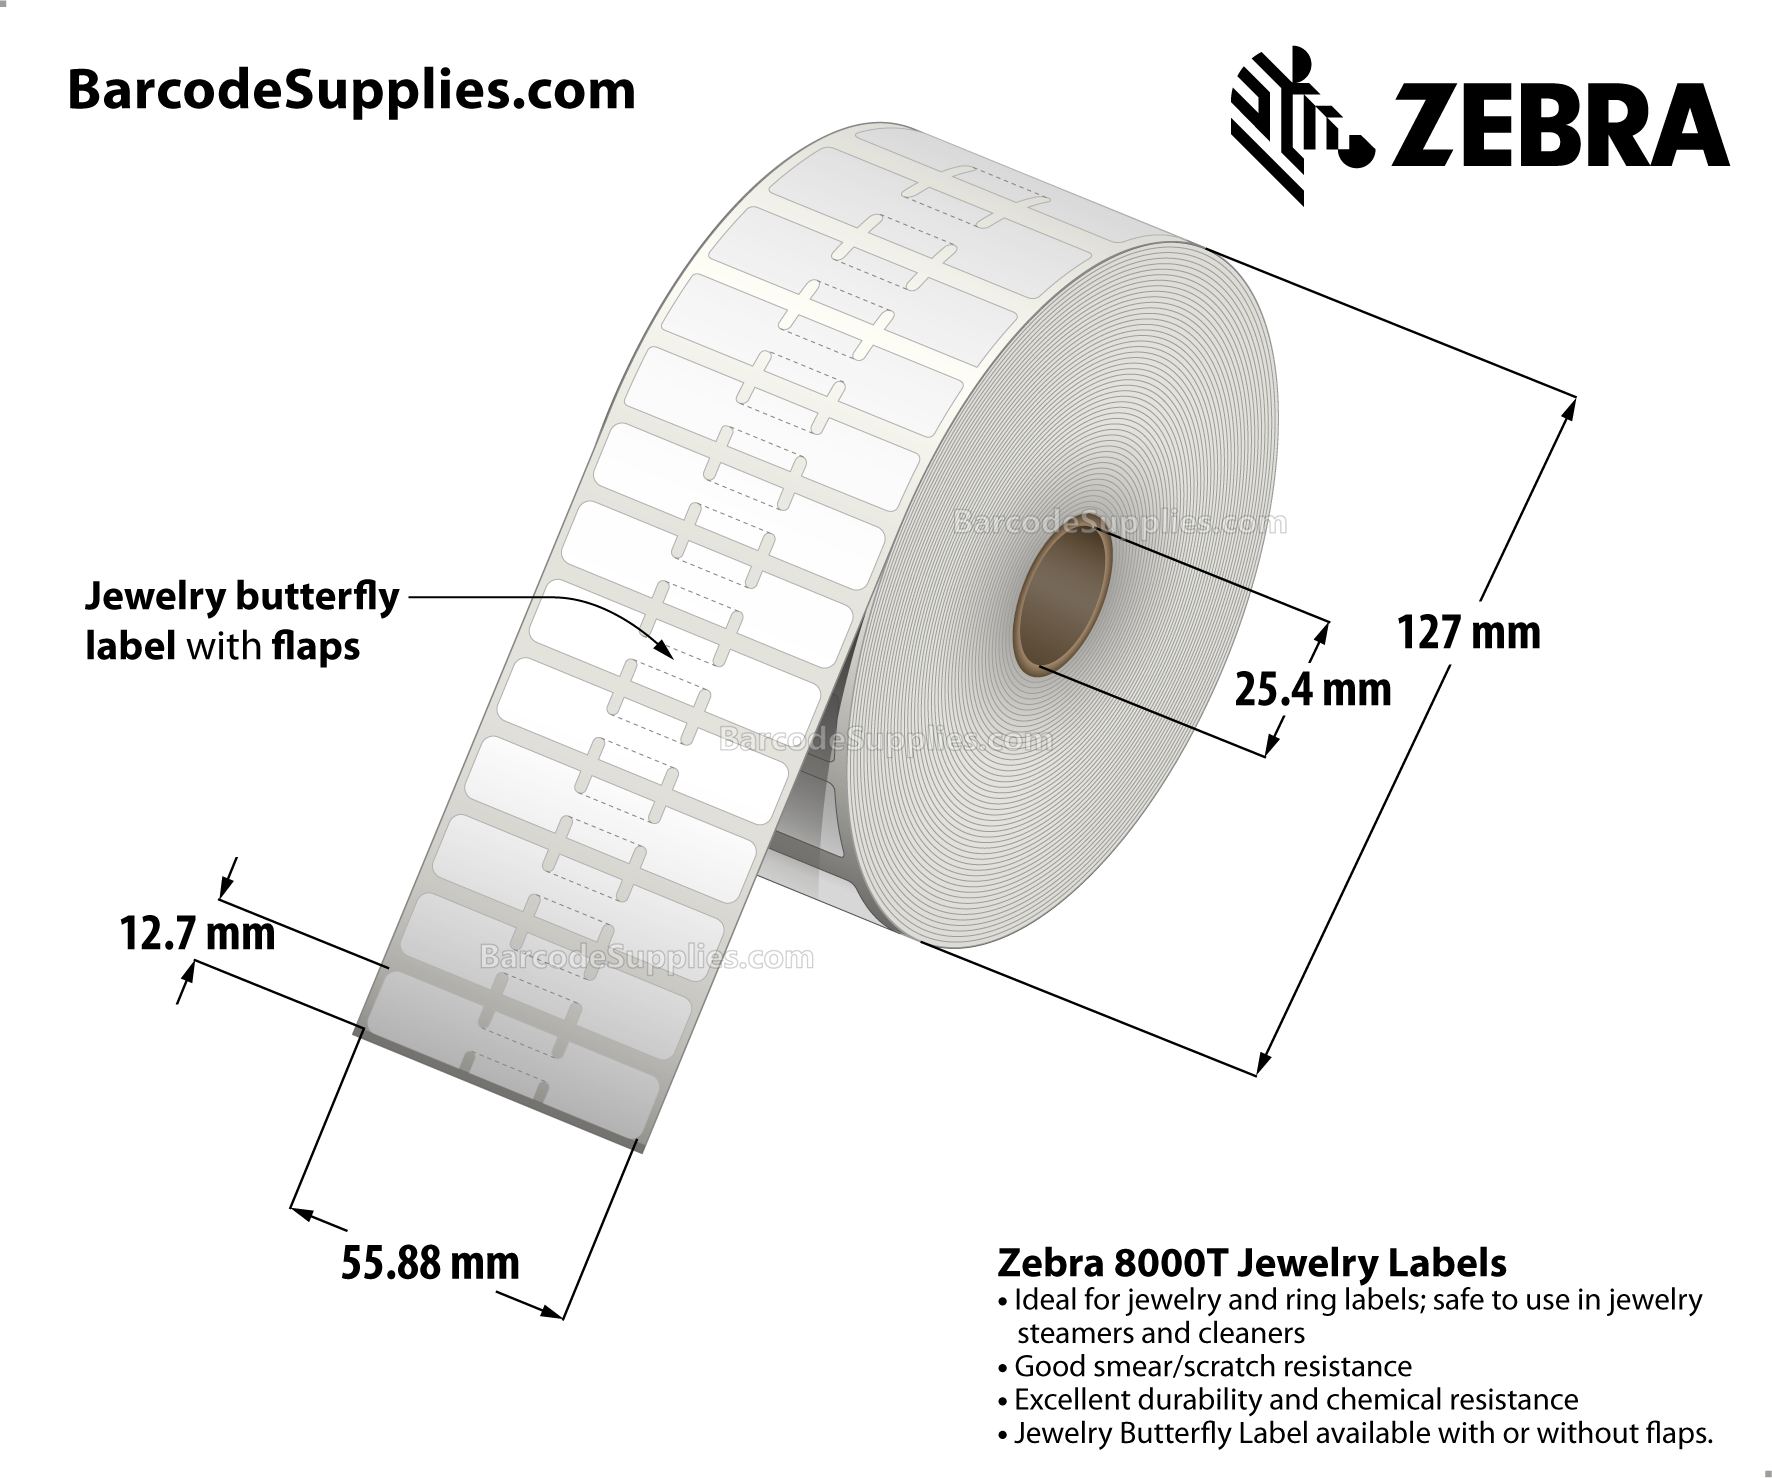 2.2 x 0.5 Thermal Transfer White 8000T Jewelry (Jewelry Butterfly Label with flaps) Labels With Permanent Adhesive - Not Perforated - 3510 Labels Per Roll - Carton Of 6 Rolls - 21060 Labels Total - MPN: 10010067